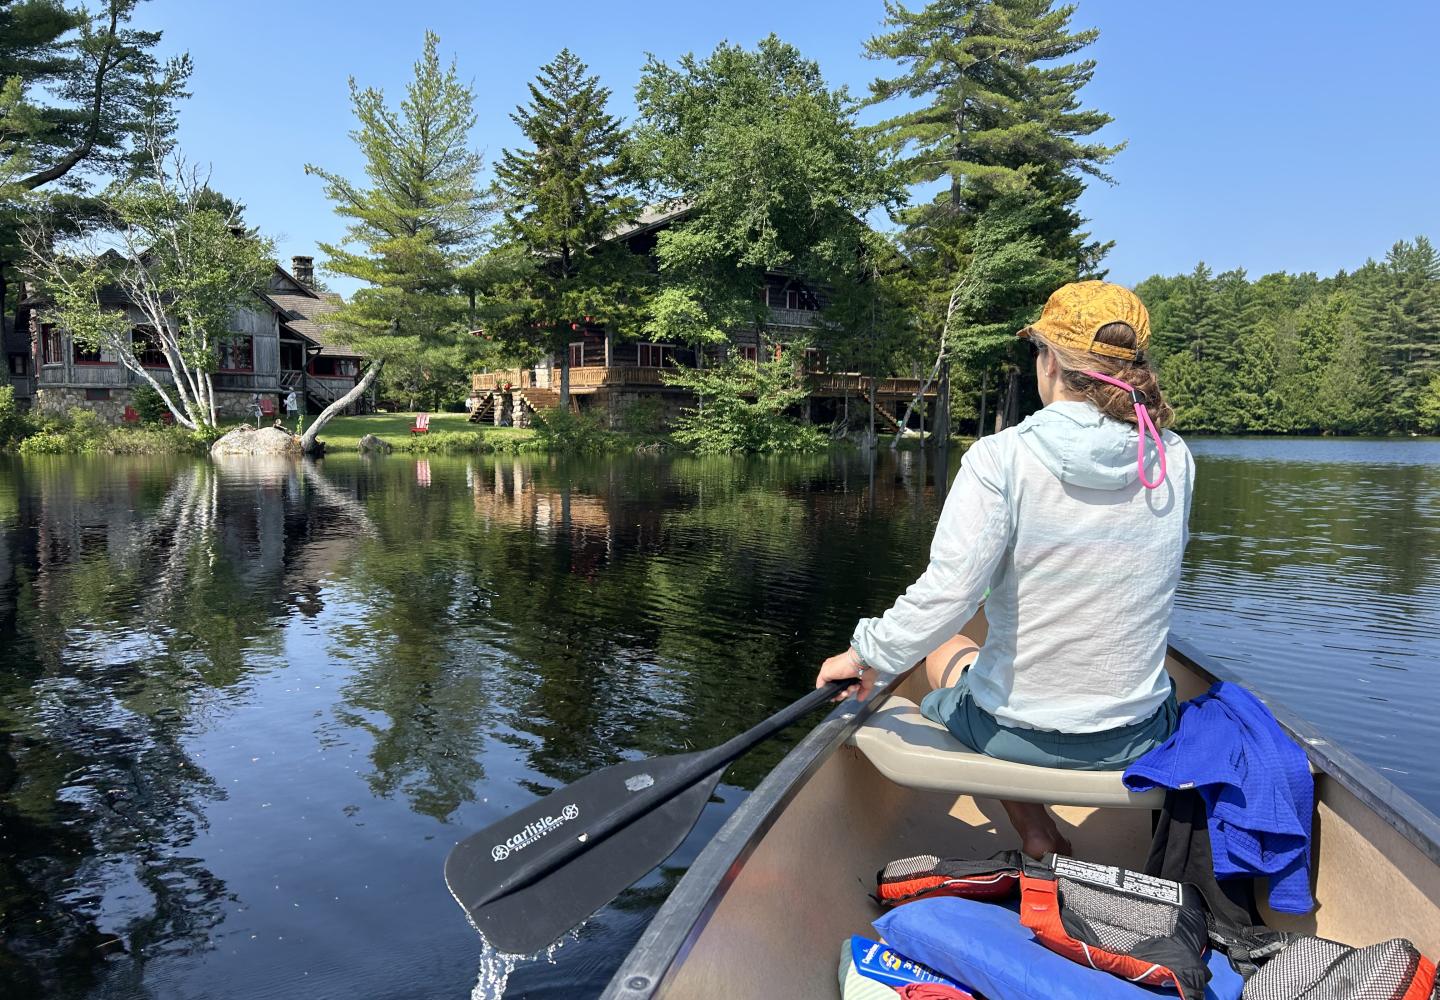 The serene waters of Sagamore Lake are a highlight of the Great Camp Sagamore Experience.